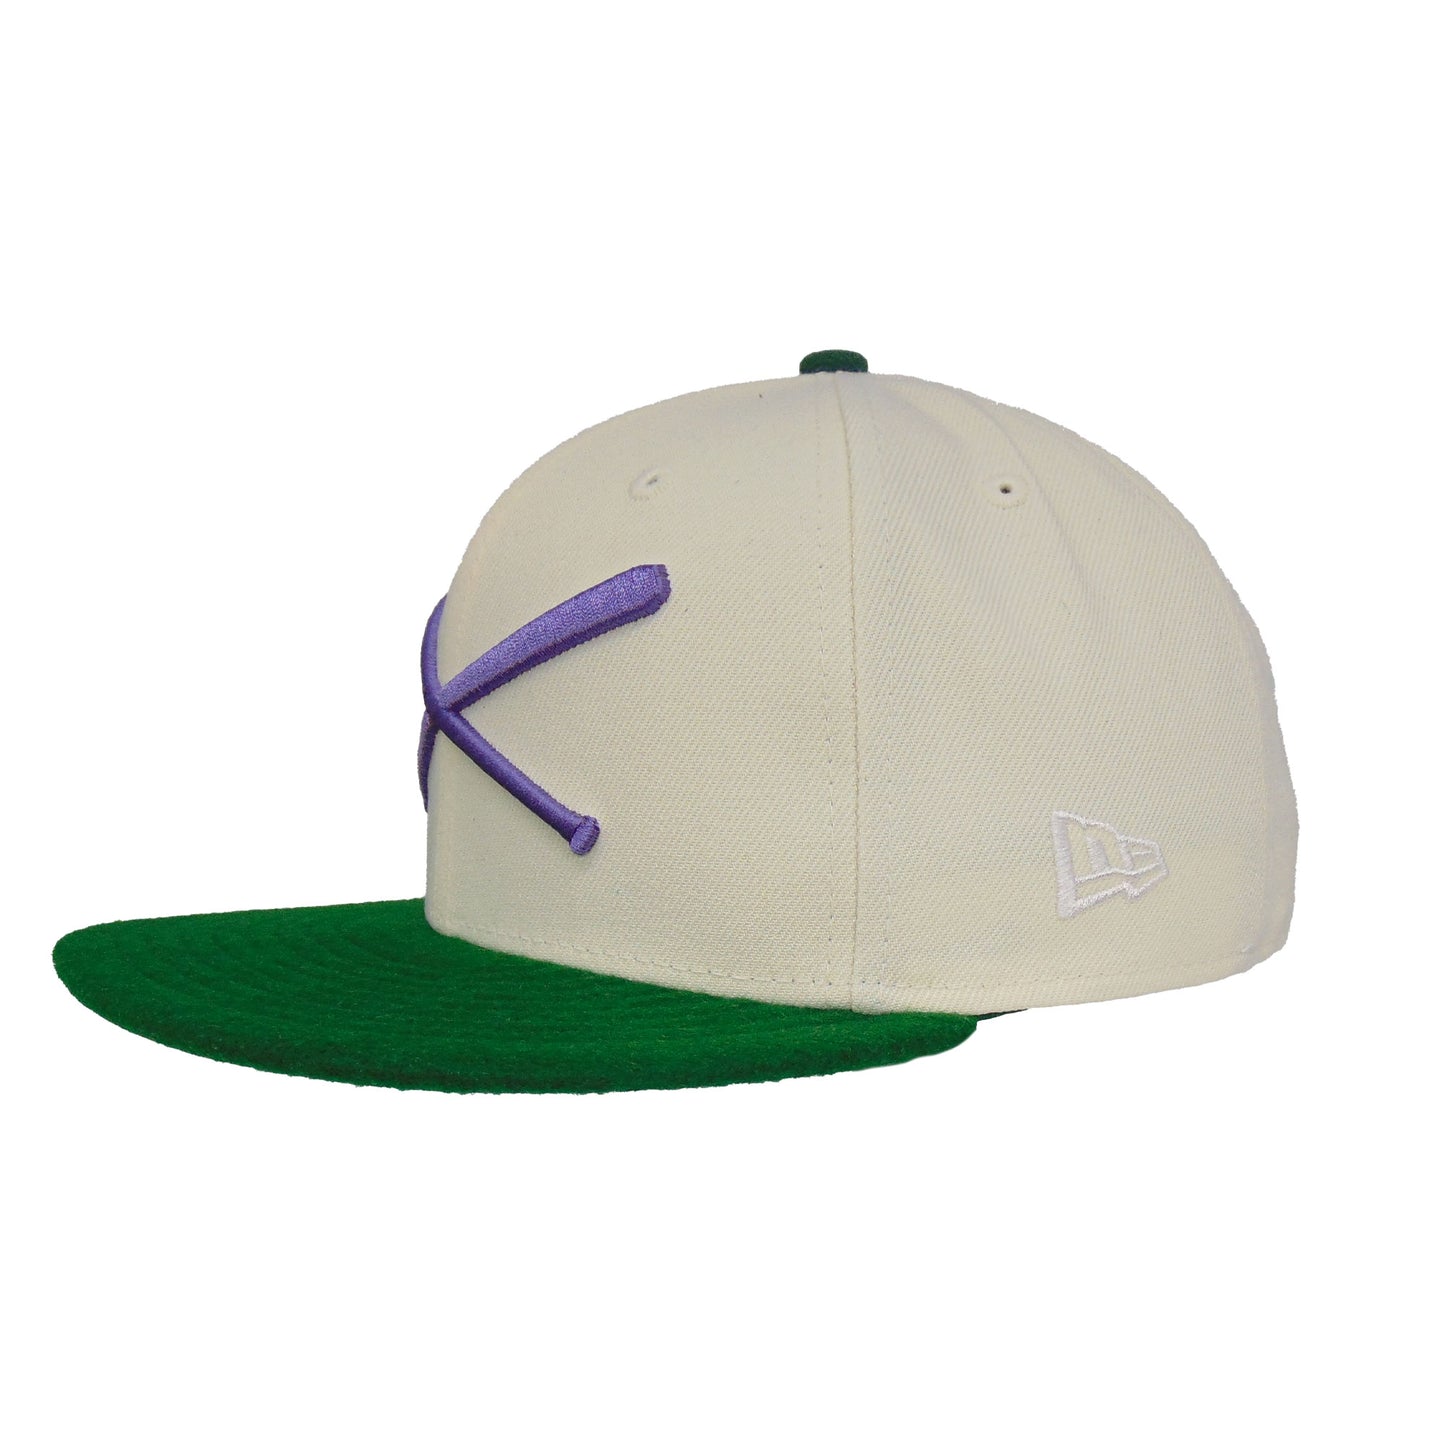 JustFitteds Crossed Bats 59FIFTY New Era Cap Championship